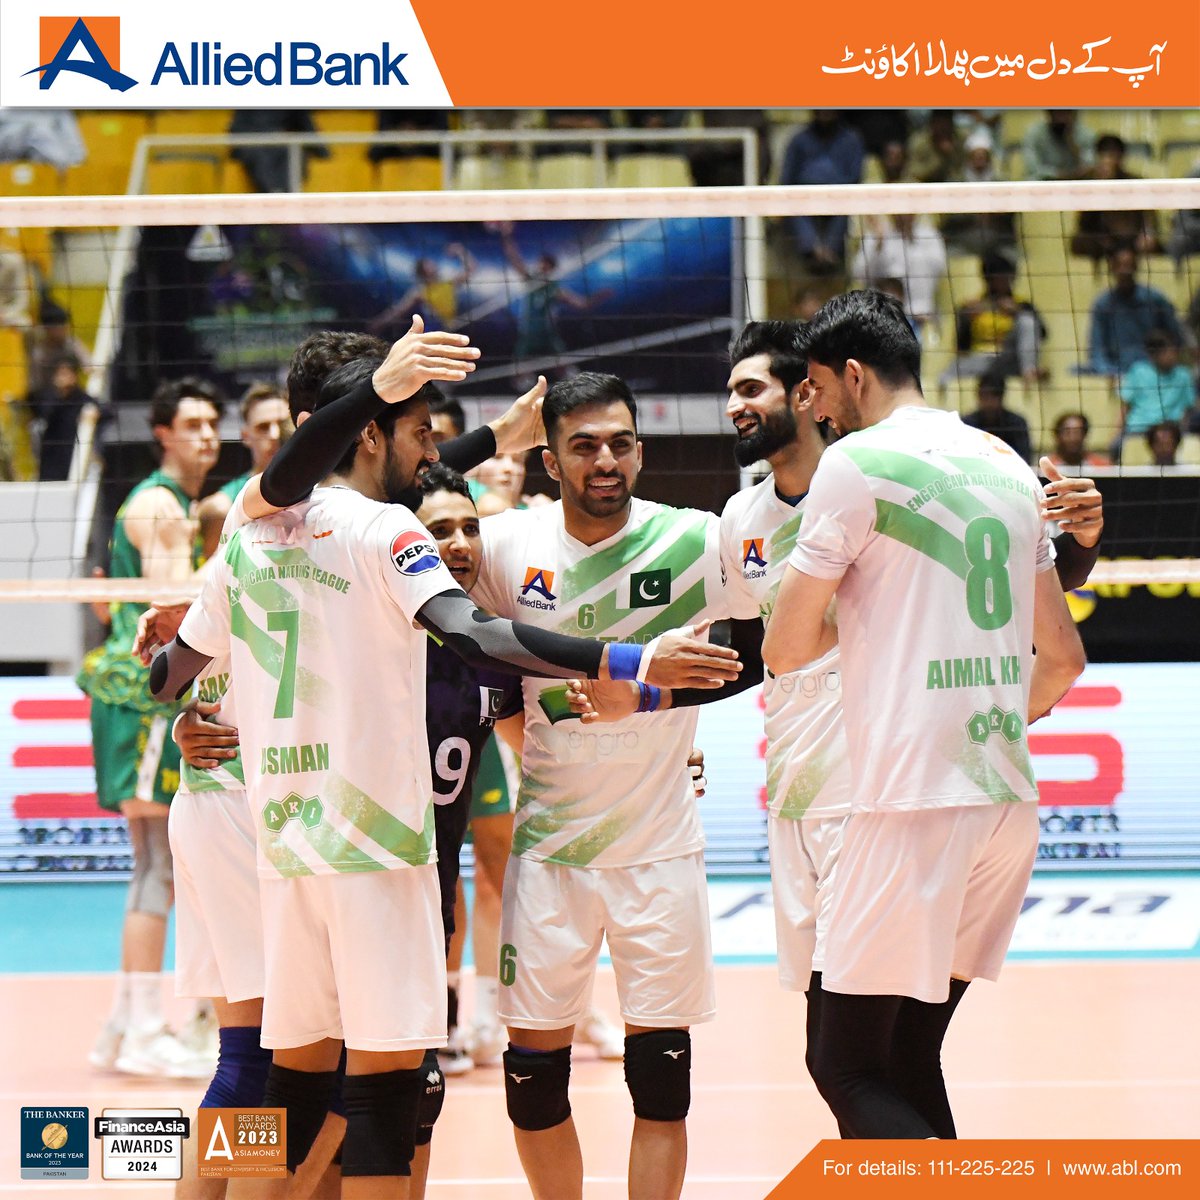 We are thrilled to announce that the Pakistan volleyball team, sponsored by Allied Bank, has secured a remarkable 2-0 series lead against Australia. Together, we celebrate this incredible achievement!

#AlliedBank #PakistanVolleyball #Victory #TeamPakistan #Sponsor